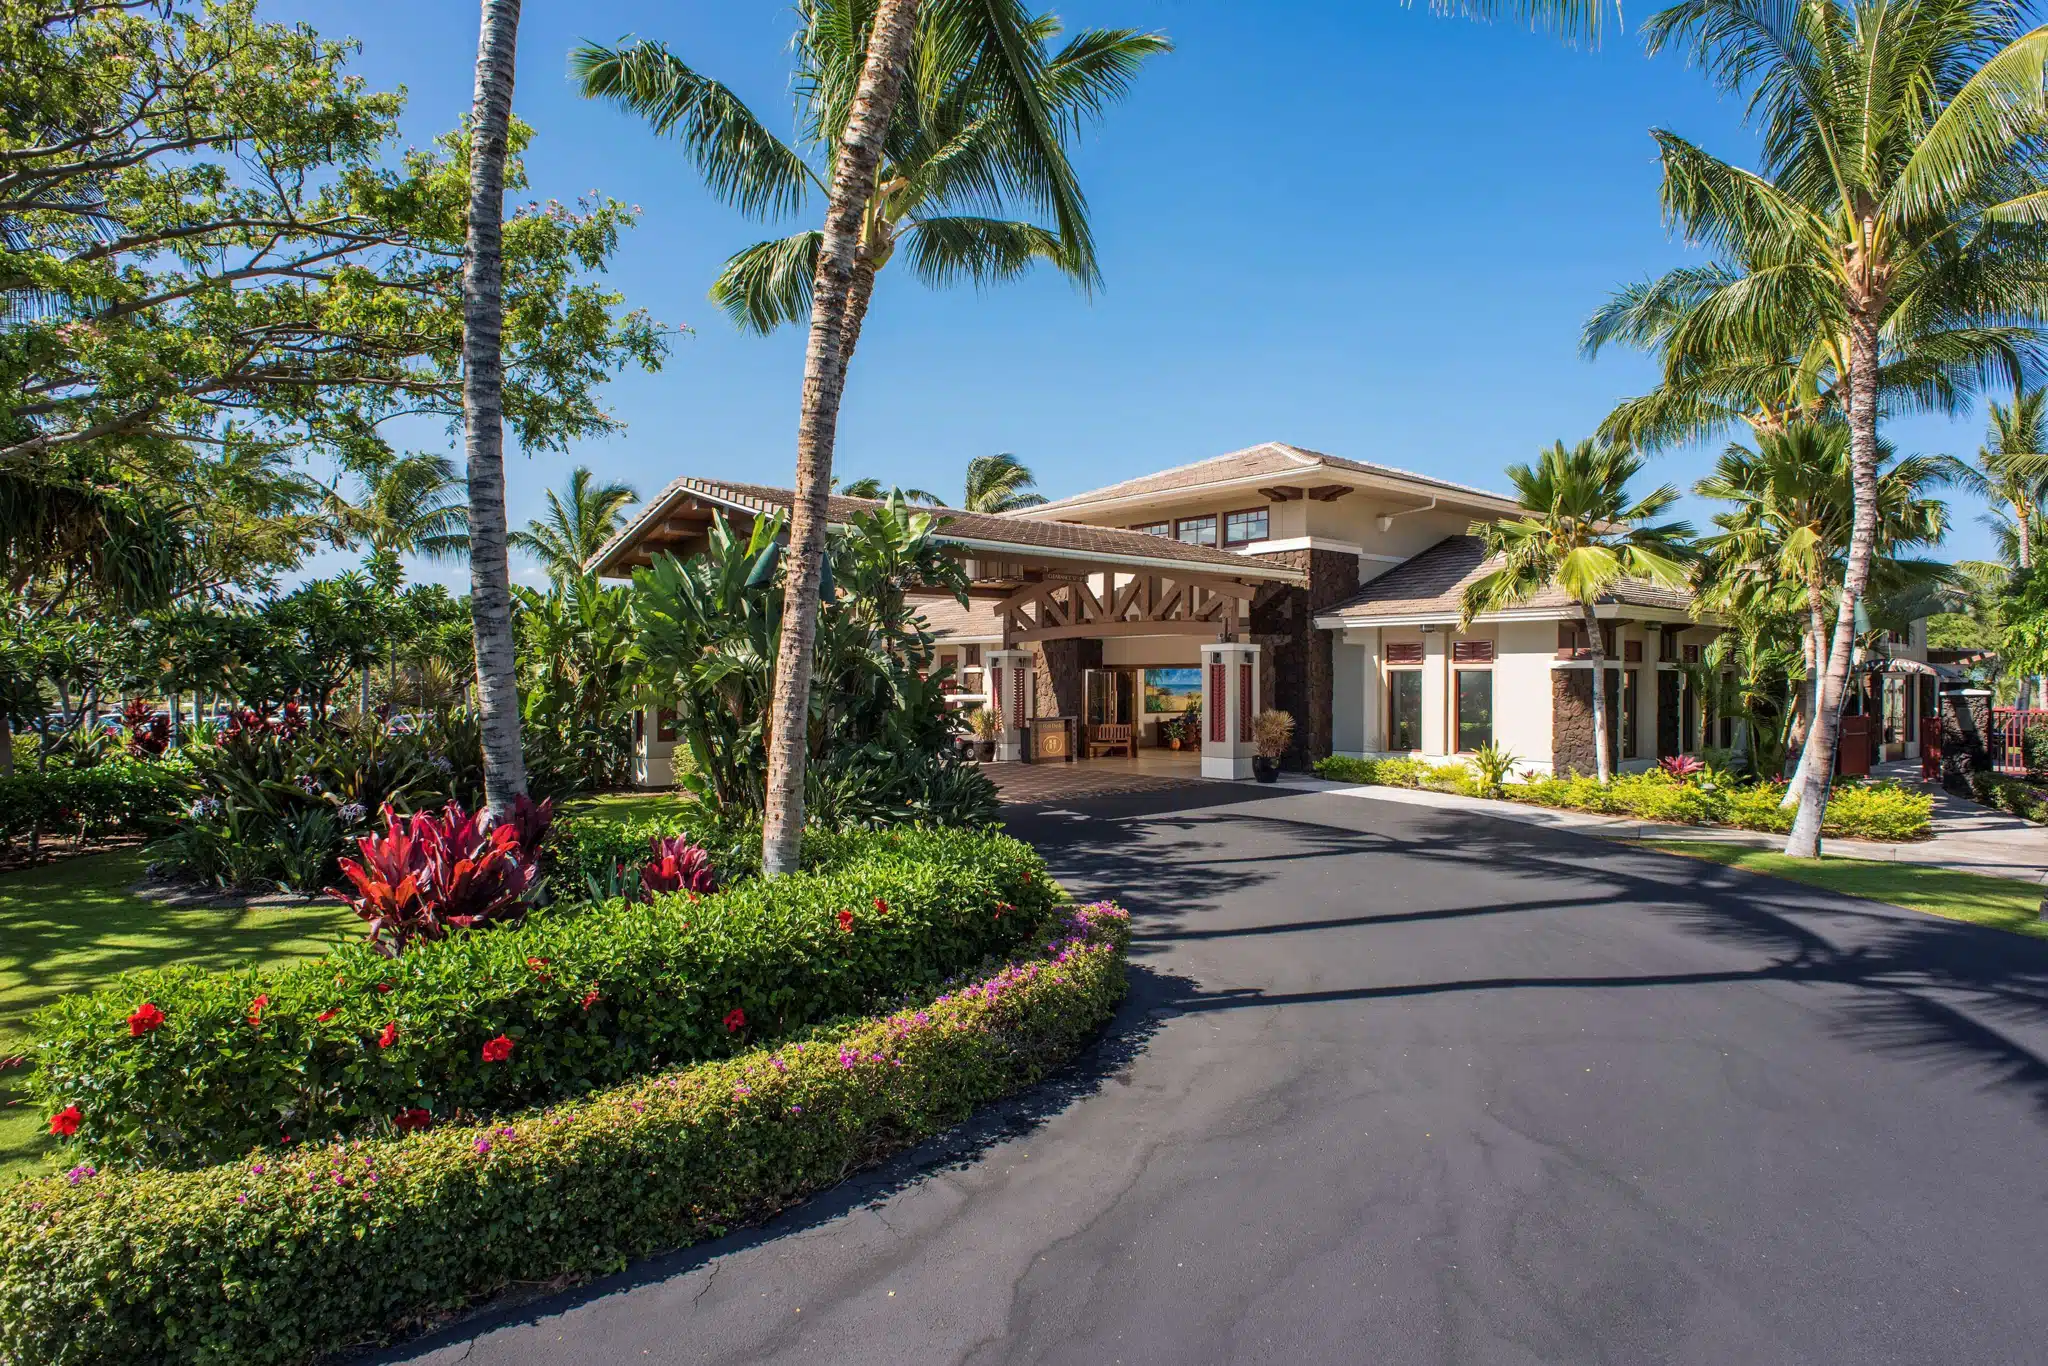 Kohala Suites by Hilton Grand Vacations is a Hotel located in the city of Waikoloa on Big Island, Hawaii